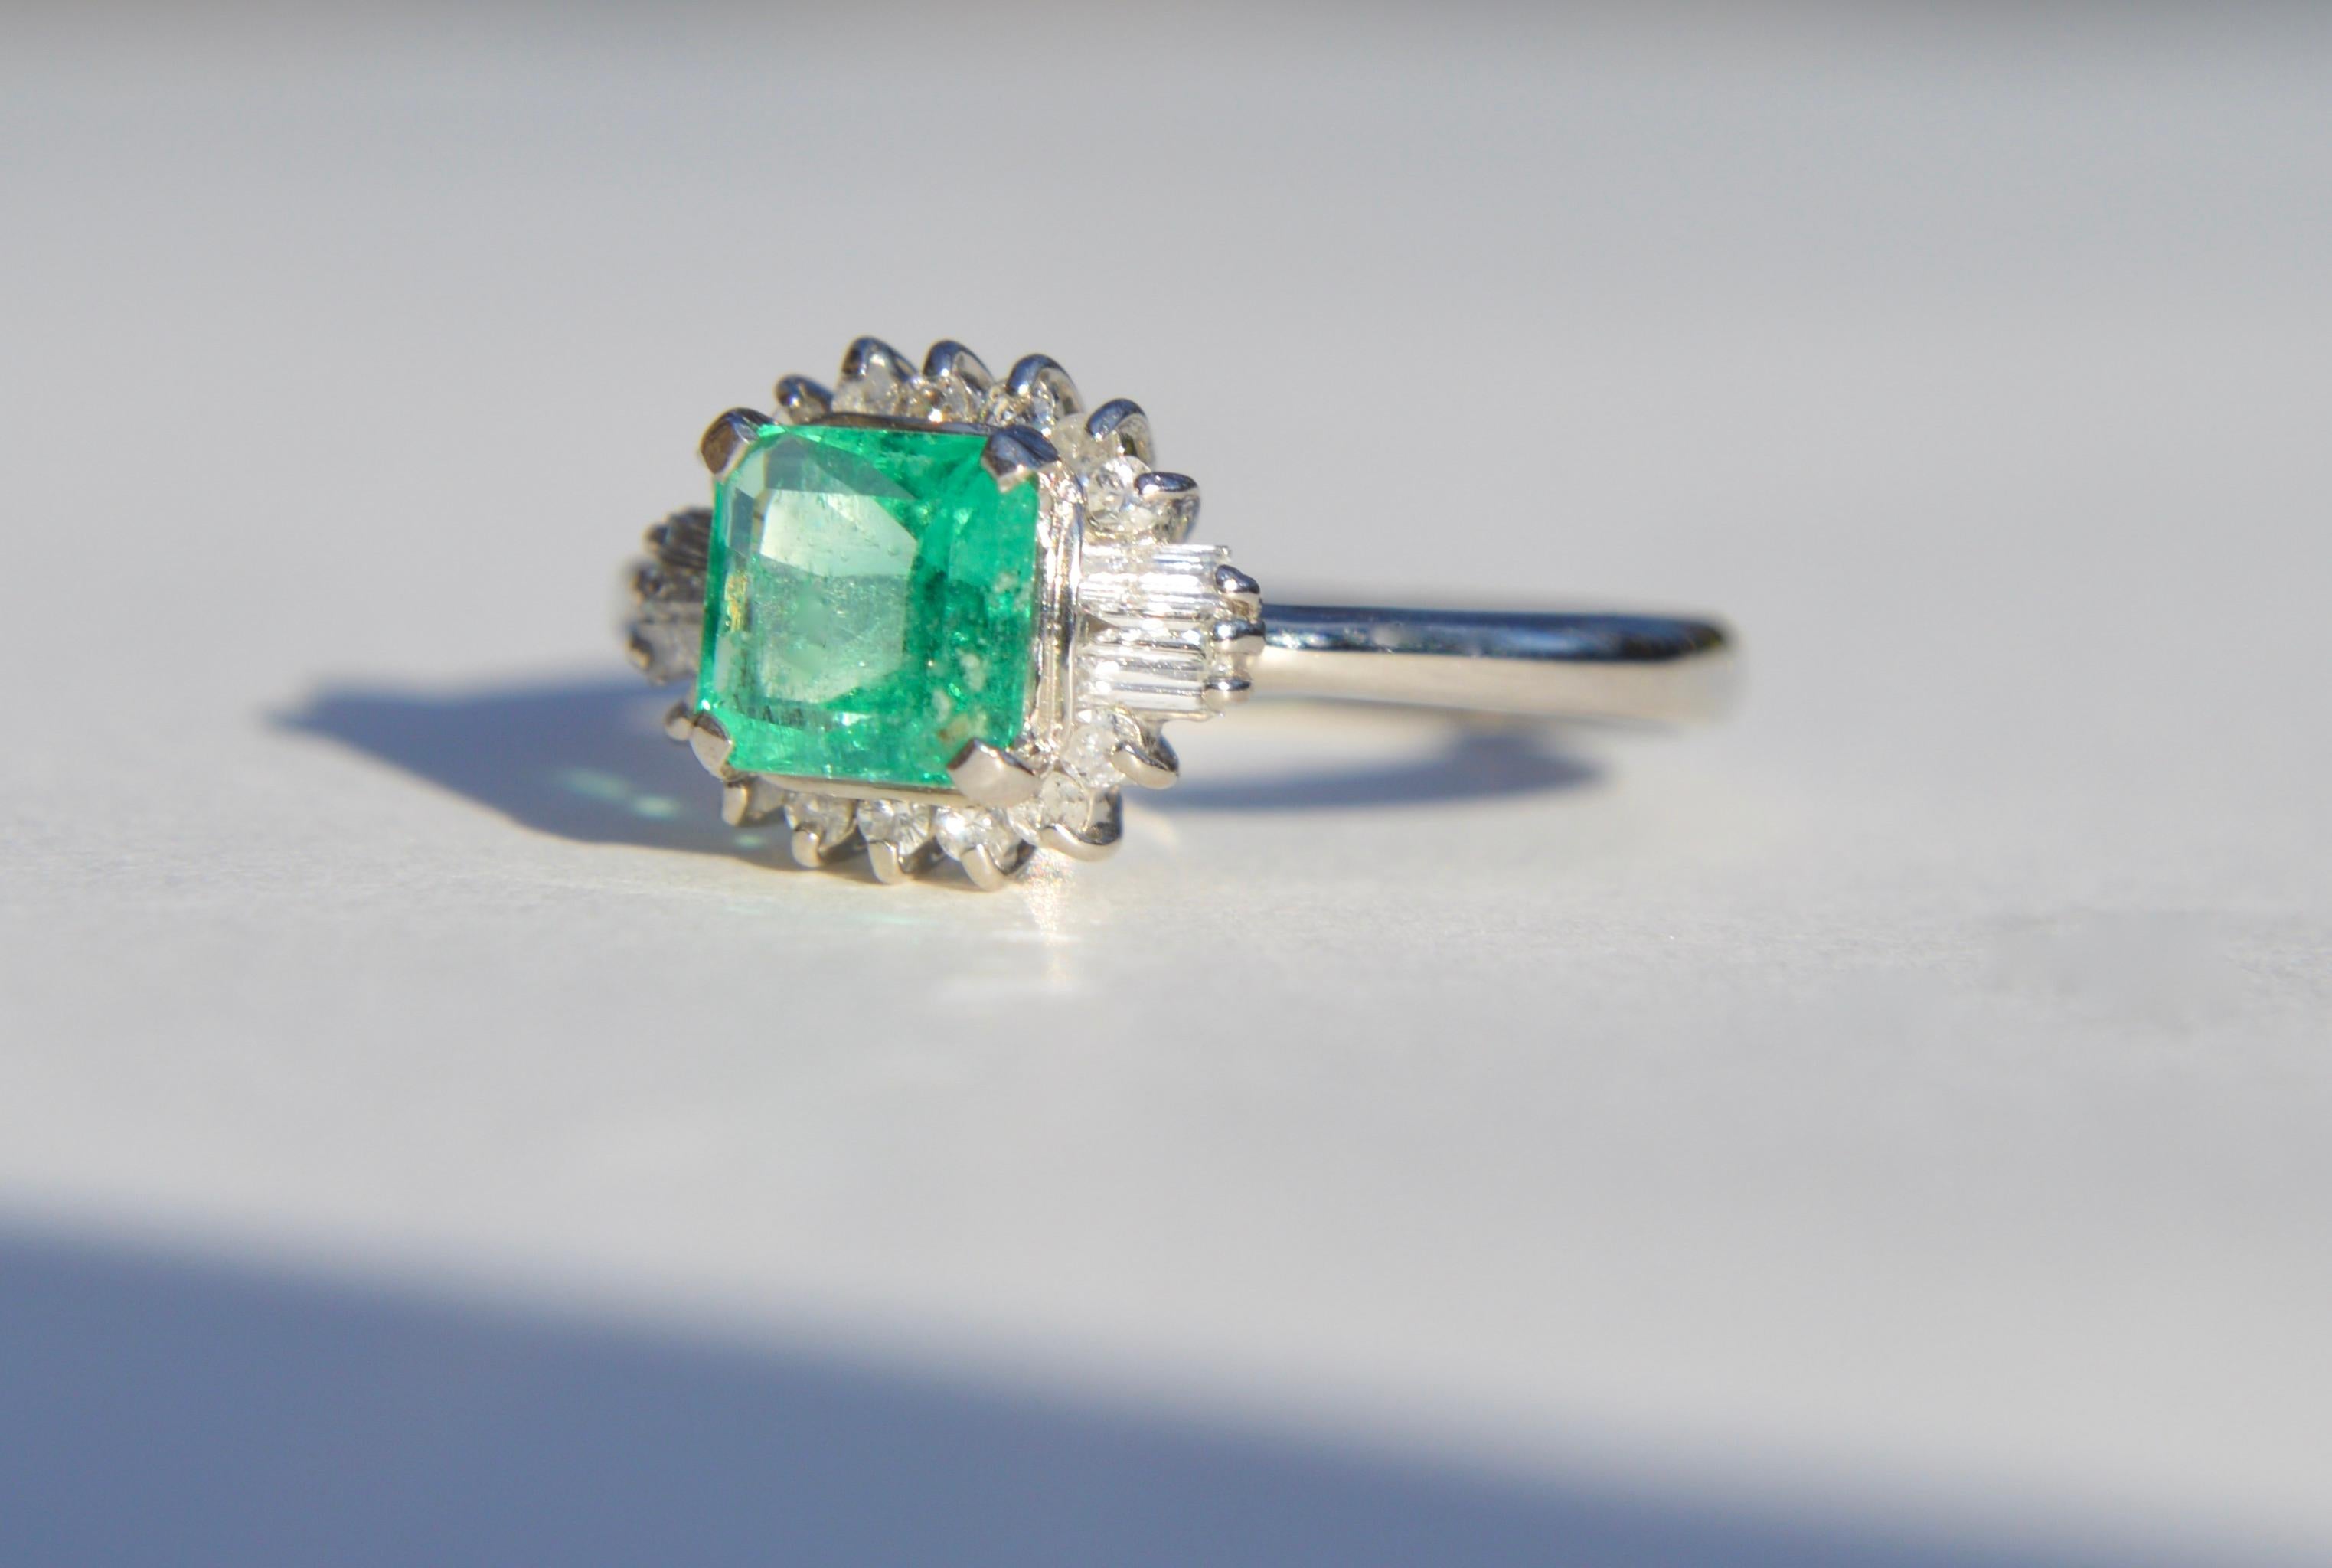 Beautiful vintage circa 1950s midcentury era .71 carat princess cut Colombian emerald ring with single cut round and baguette diamond halo in solid platinum. Ring is marked as PT900 for platinum. Size 6.25, can be resized by a jeweler. Emerald